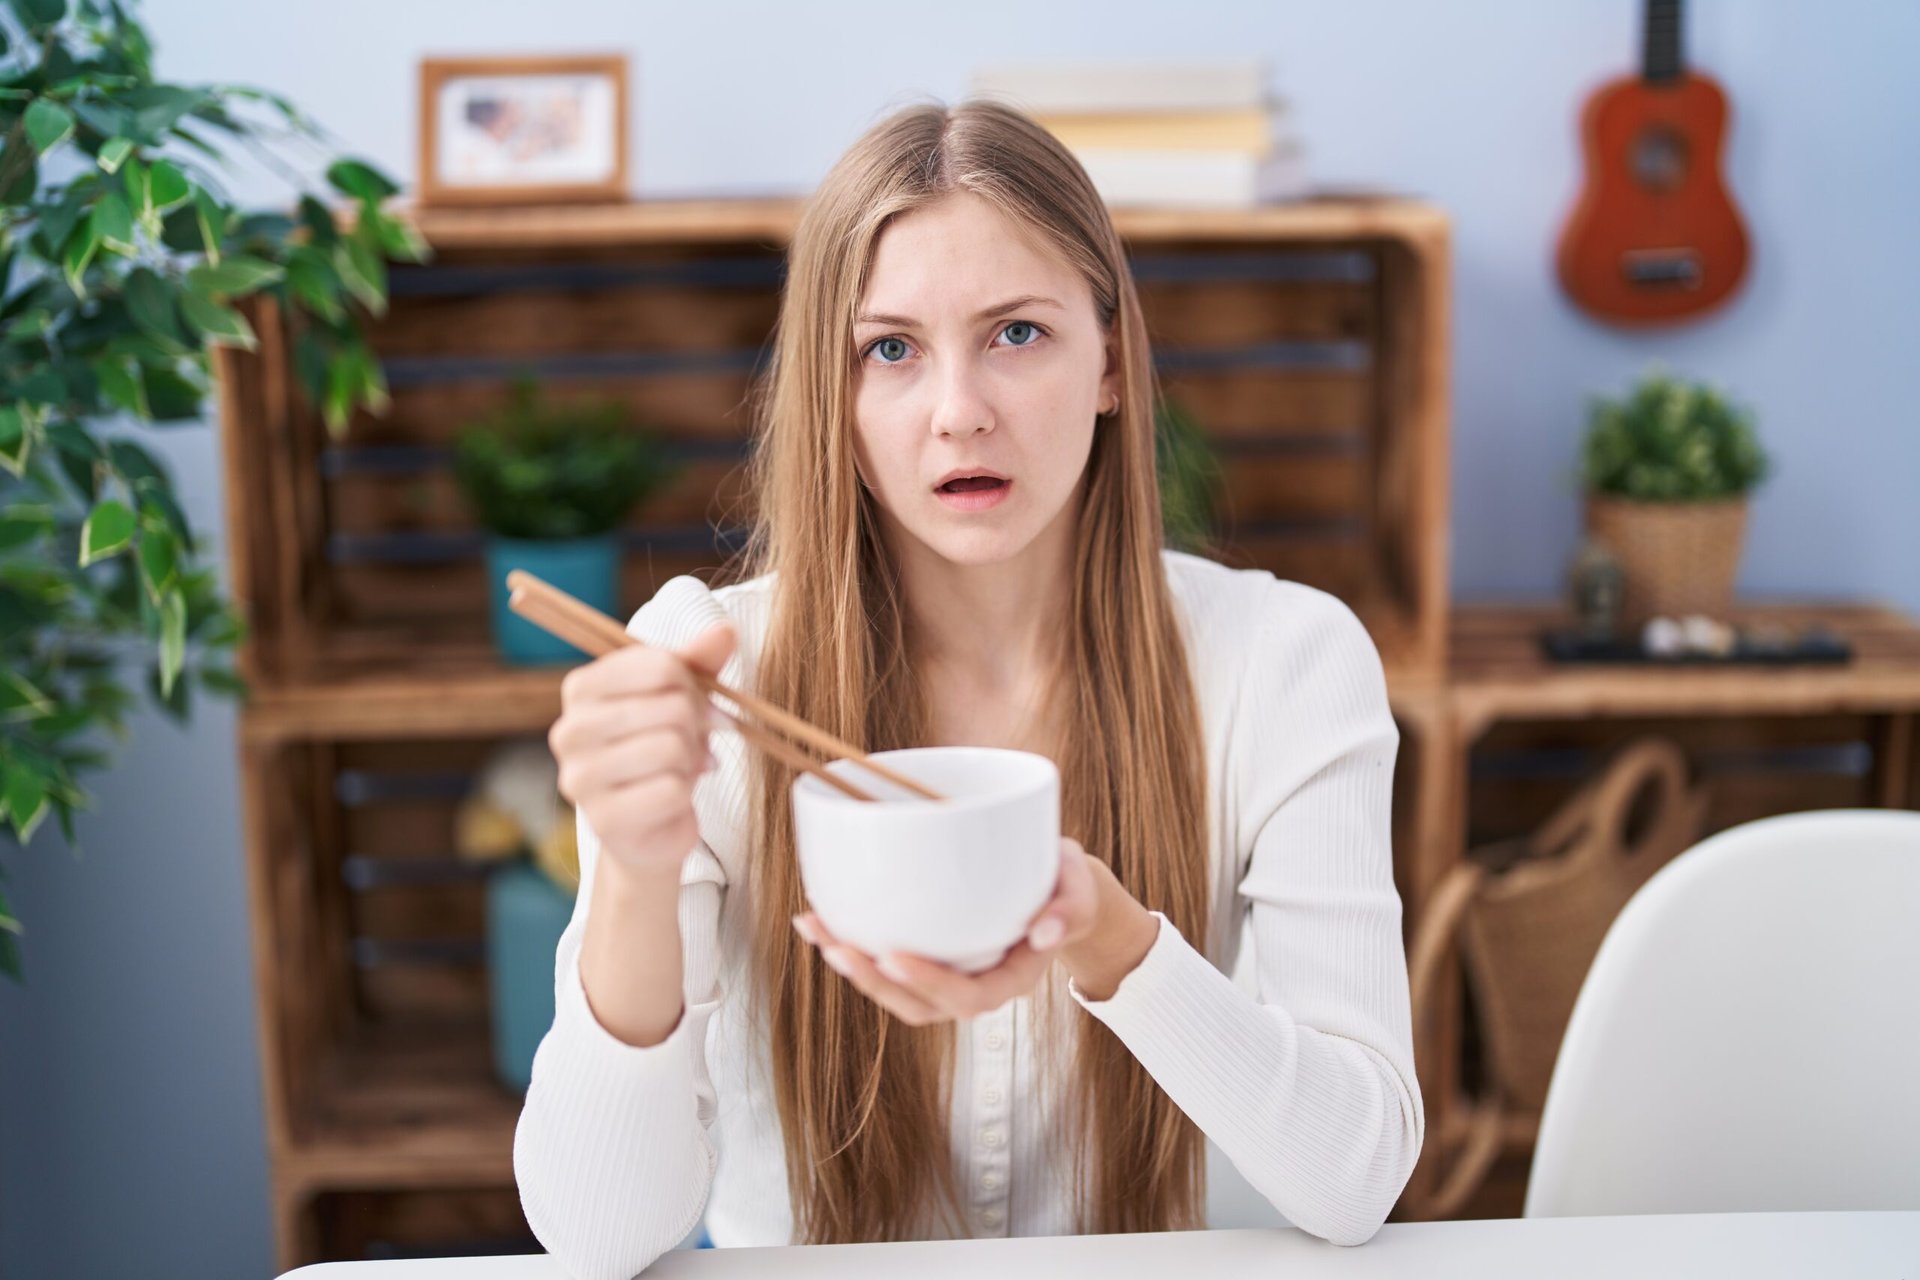 Upset woman eating food out of a bowl with chopsticks.